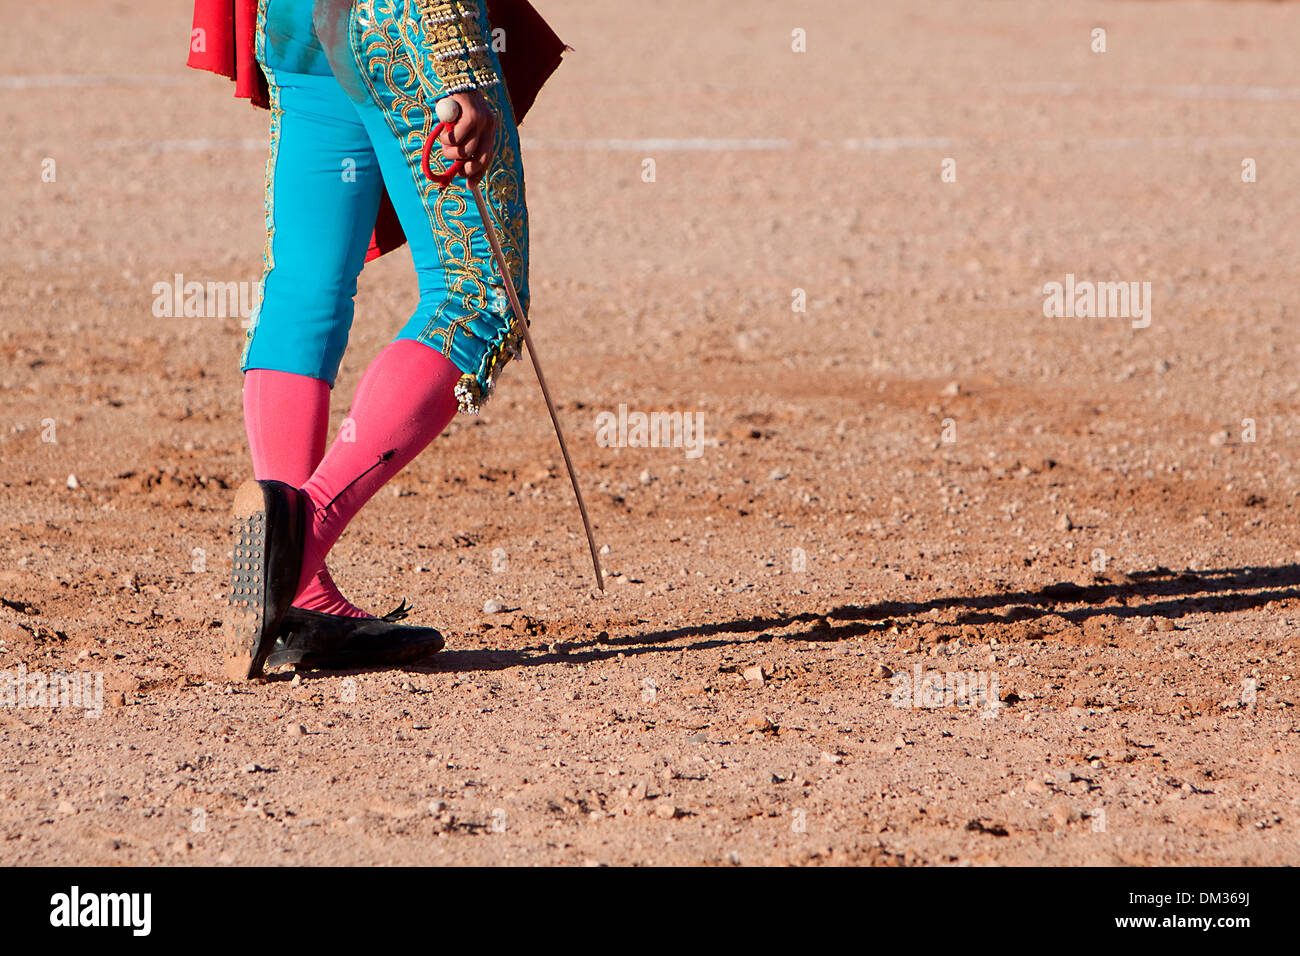 Bullfighting walking on the sand with his sword, Spain Stock Photo